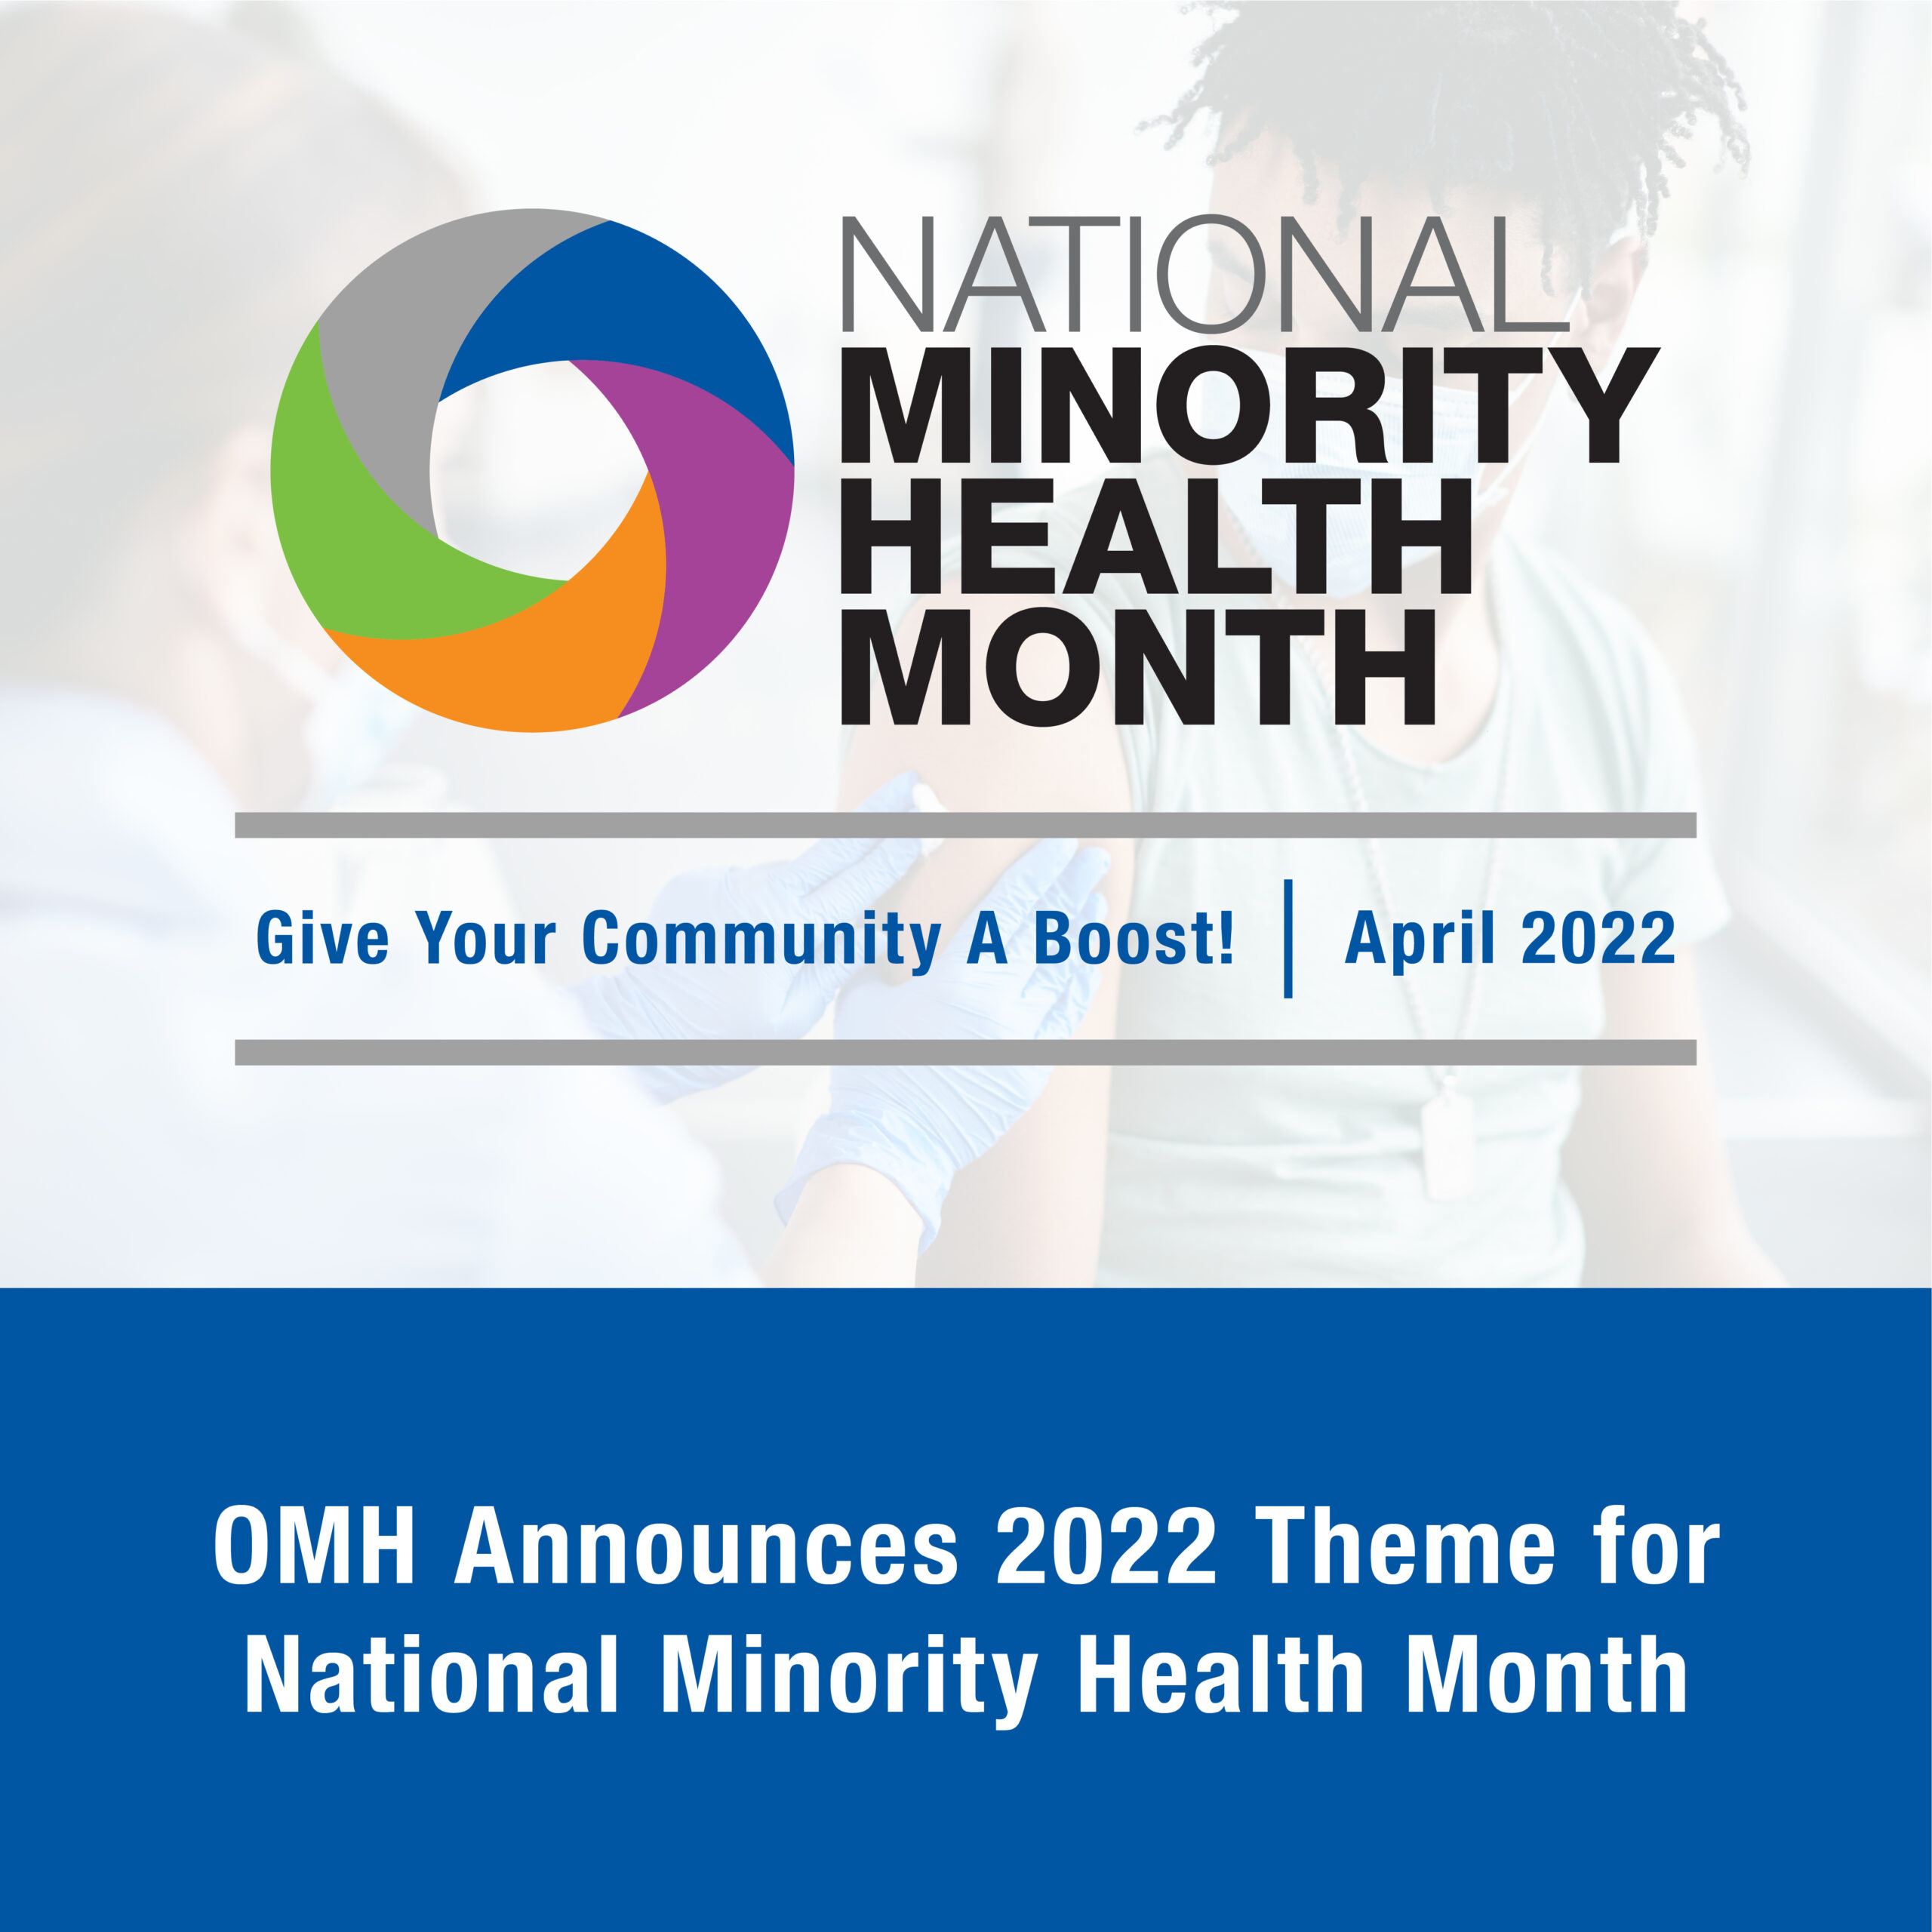 National Minority Health Month April 2022